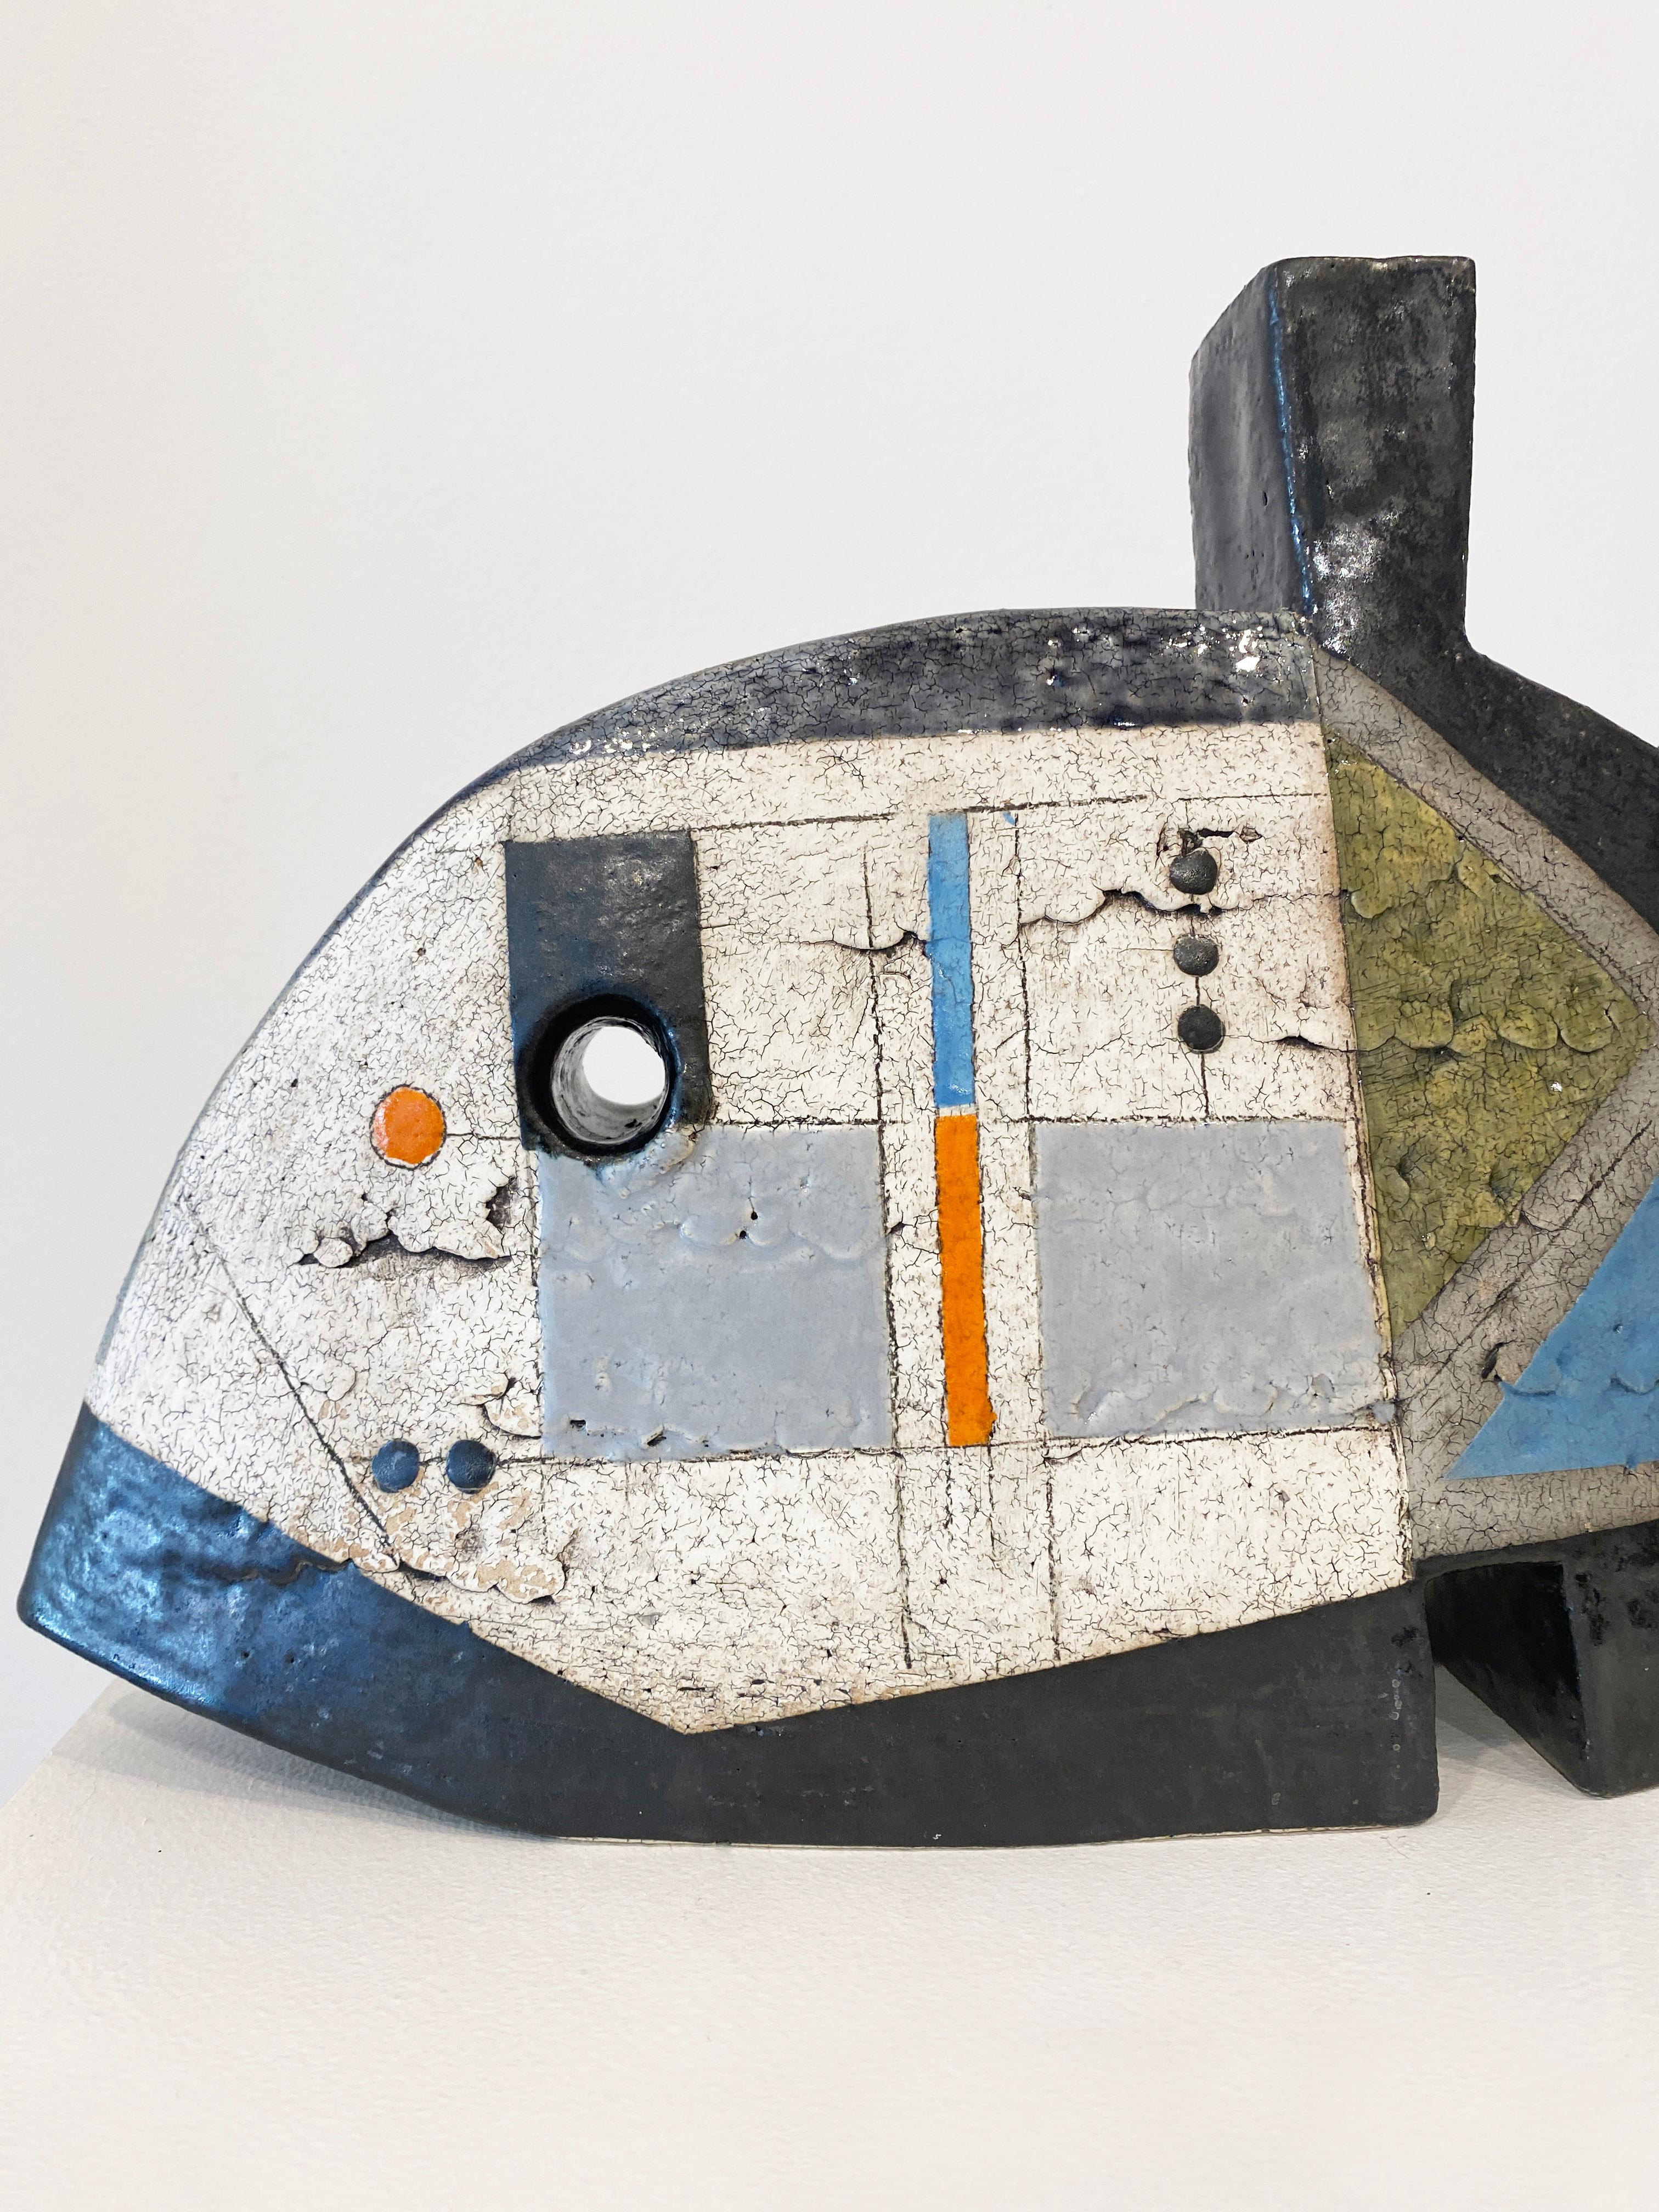 'Seaworthy' by Contemporary American artist, Sheryl Zacharia. Ceramic, 10 x 15.5 x 4 in. This sculpture incorporates a bold palette of colors in orange, blue, green, grey, white, and black. 

Zacharia's table-sized ceramics are a conversation